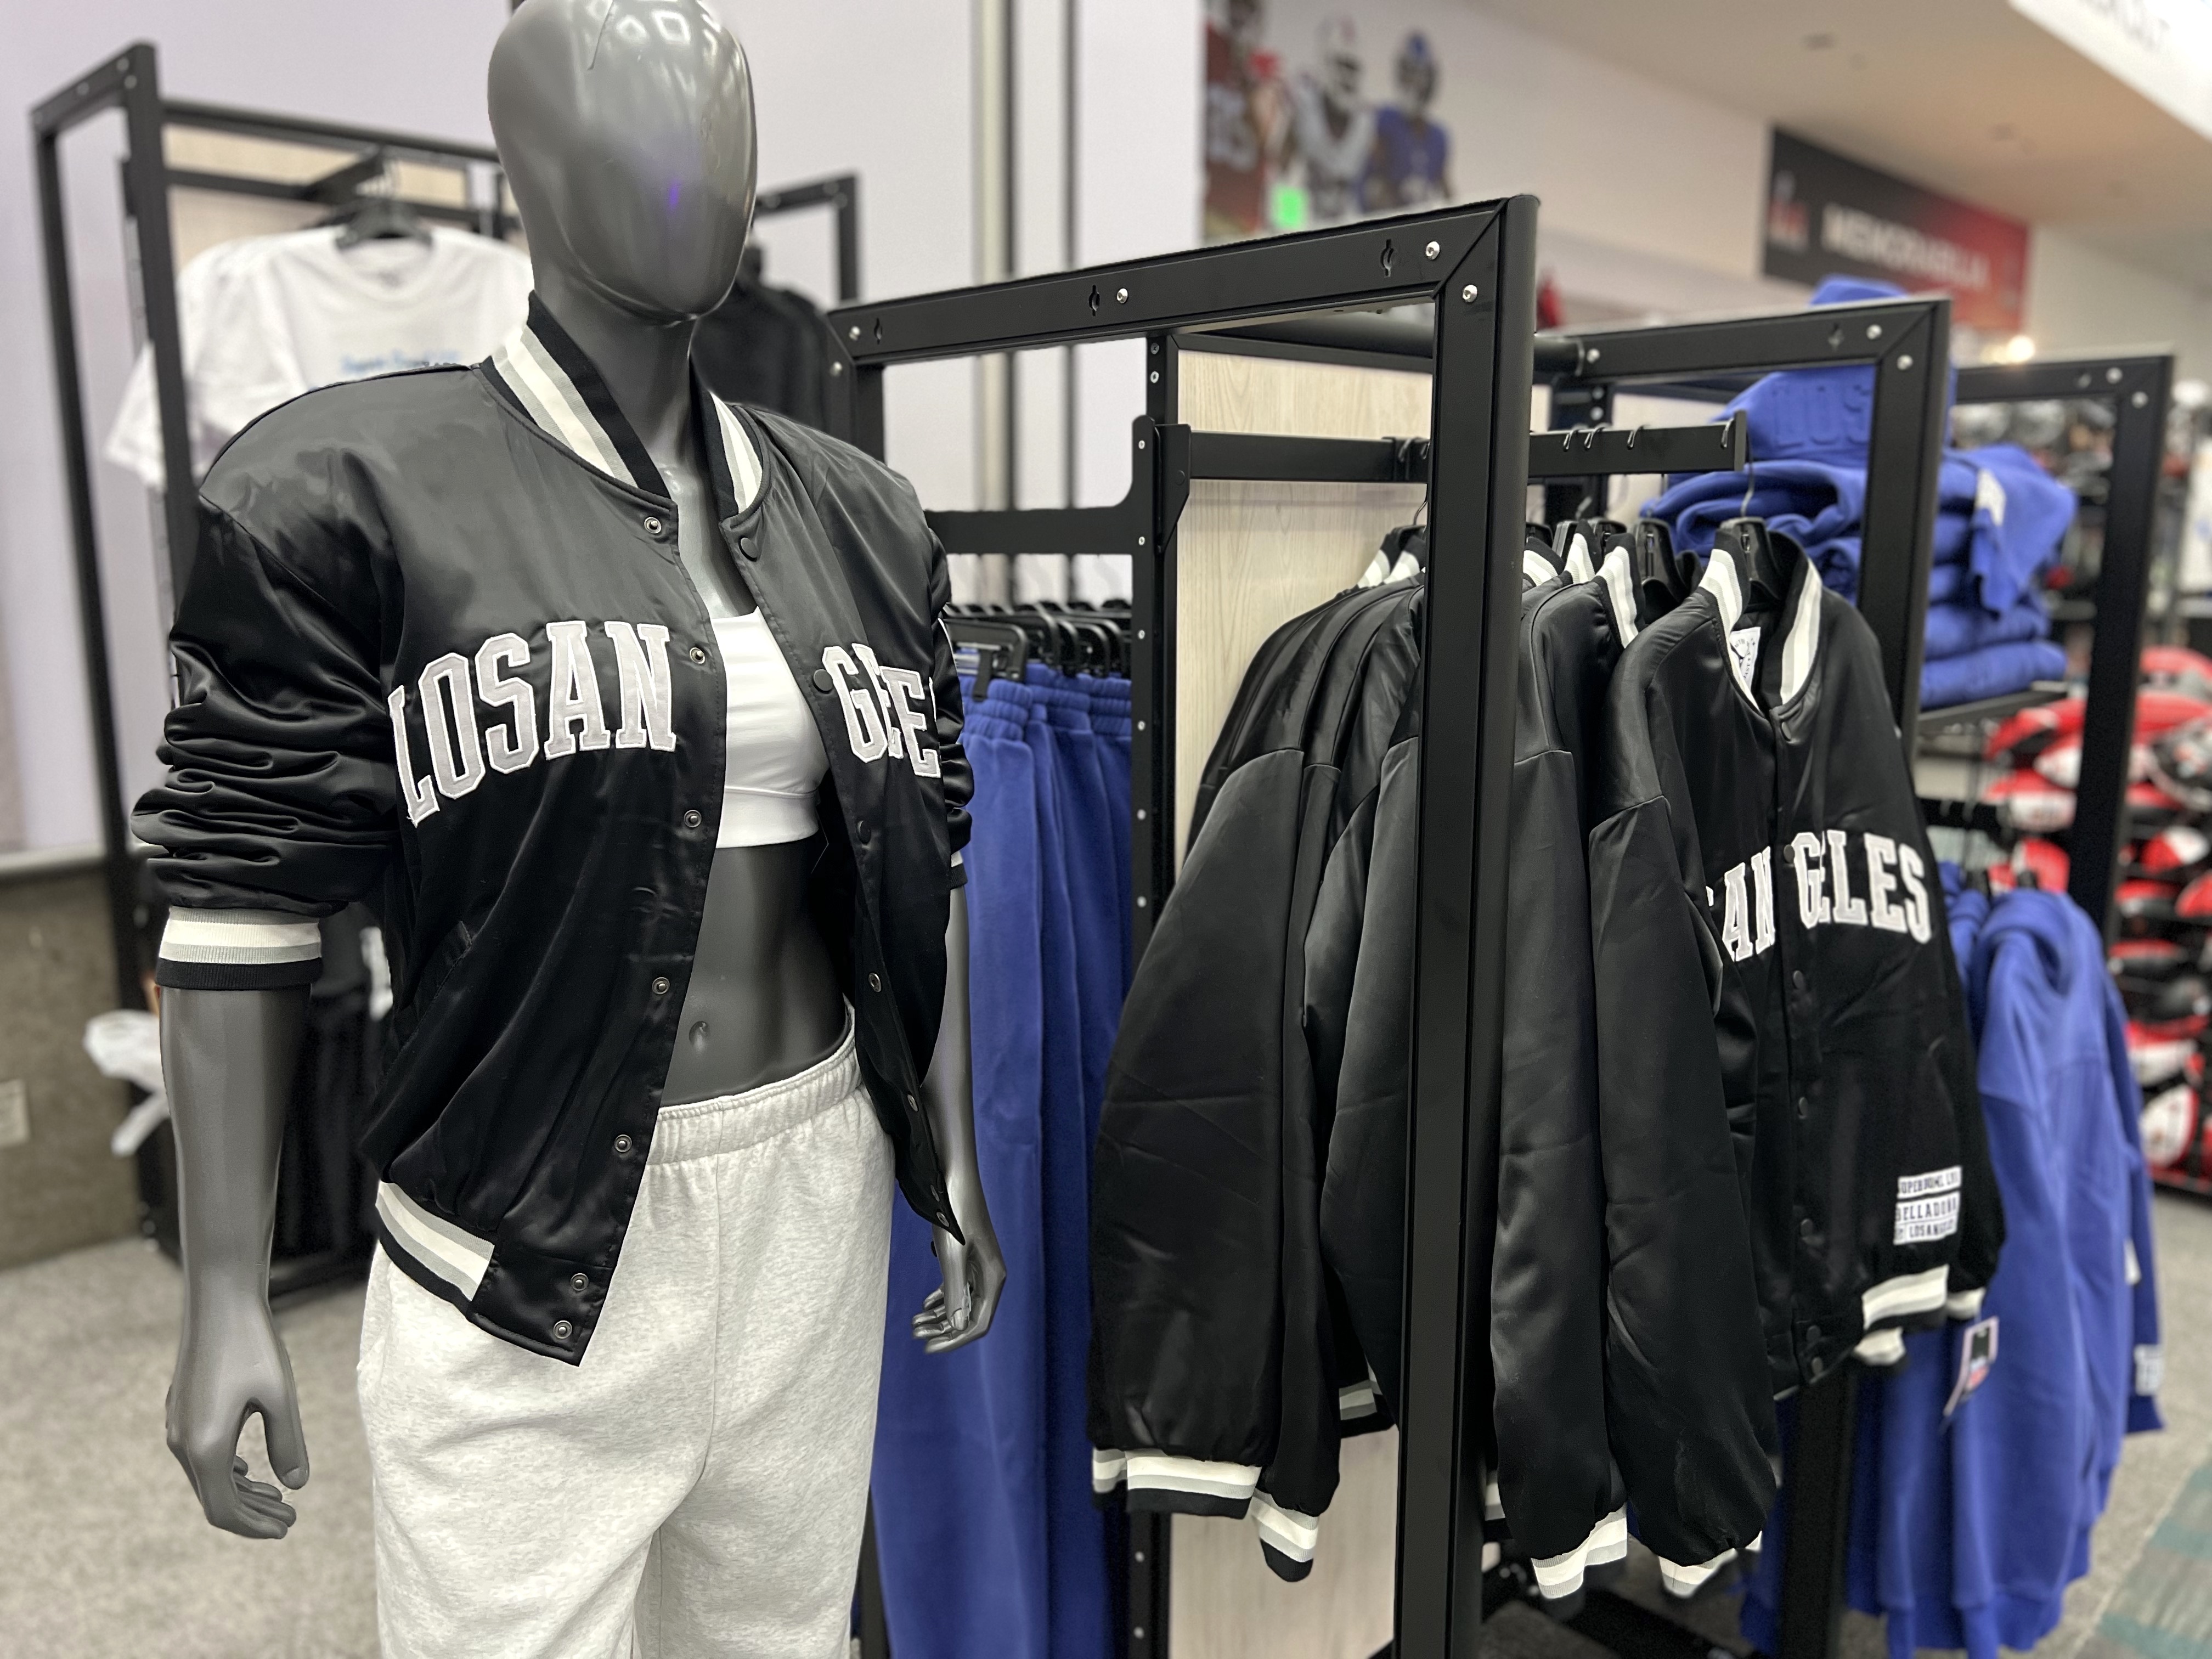 Super Bowl 2022: Where to Buy Rams Merch and Gear Online